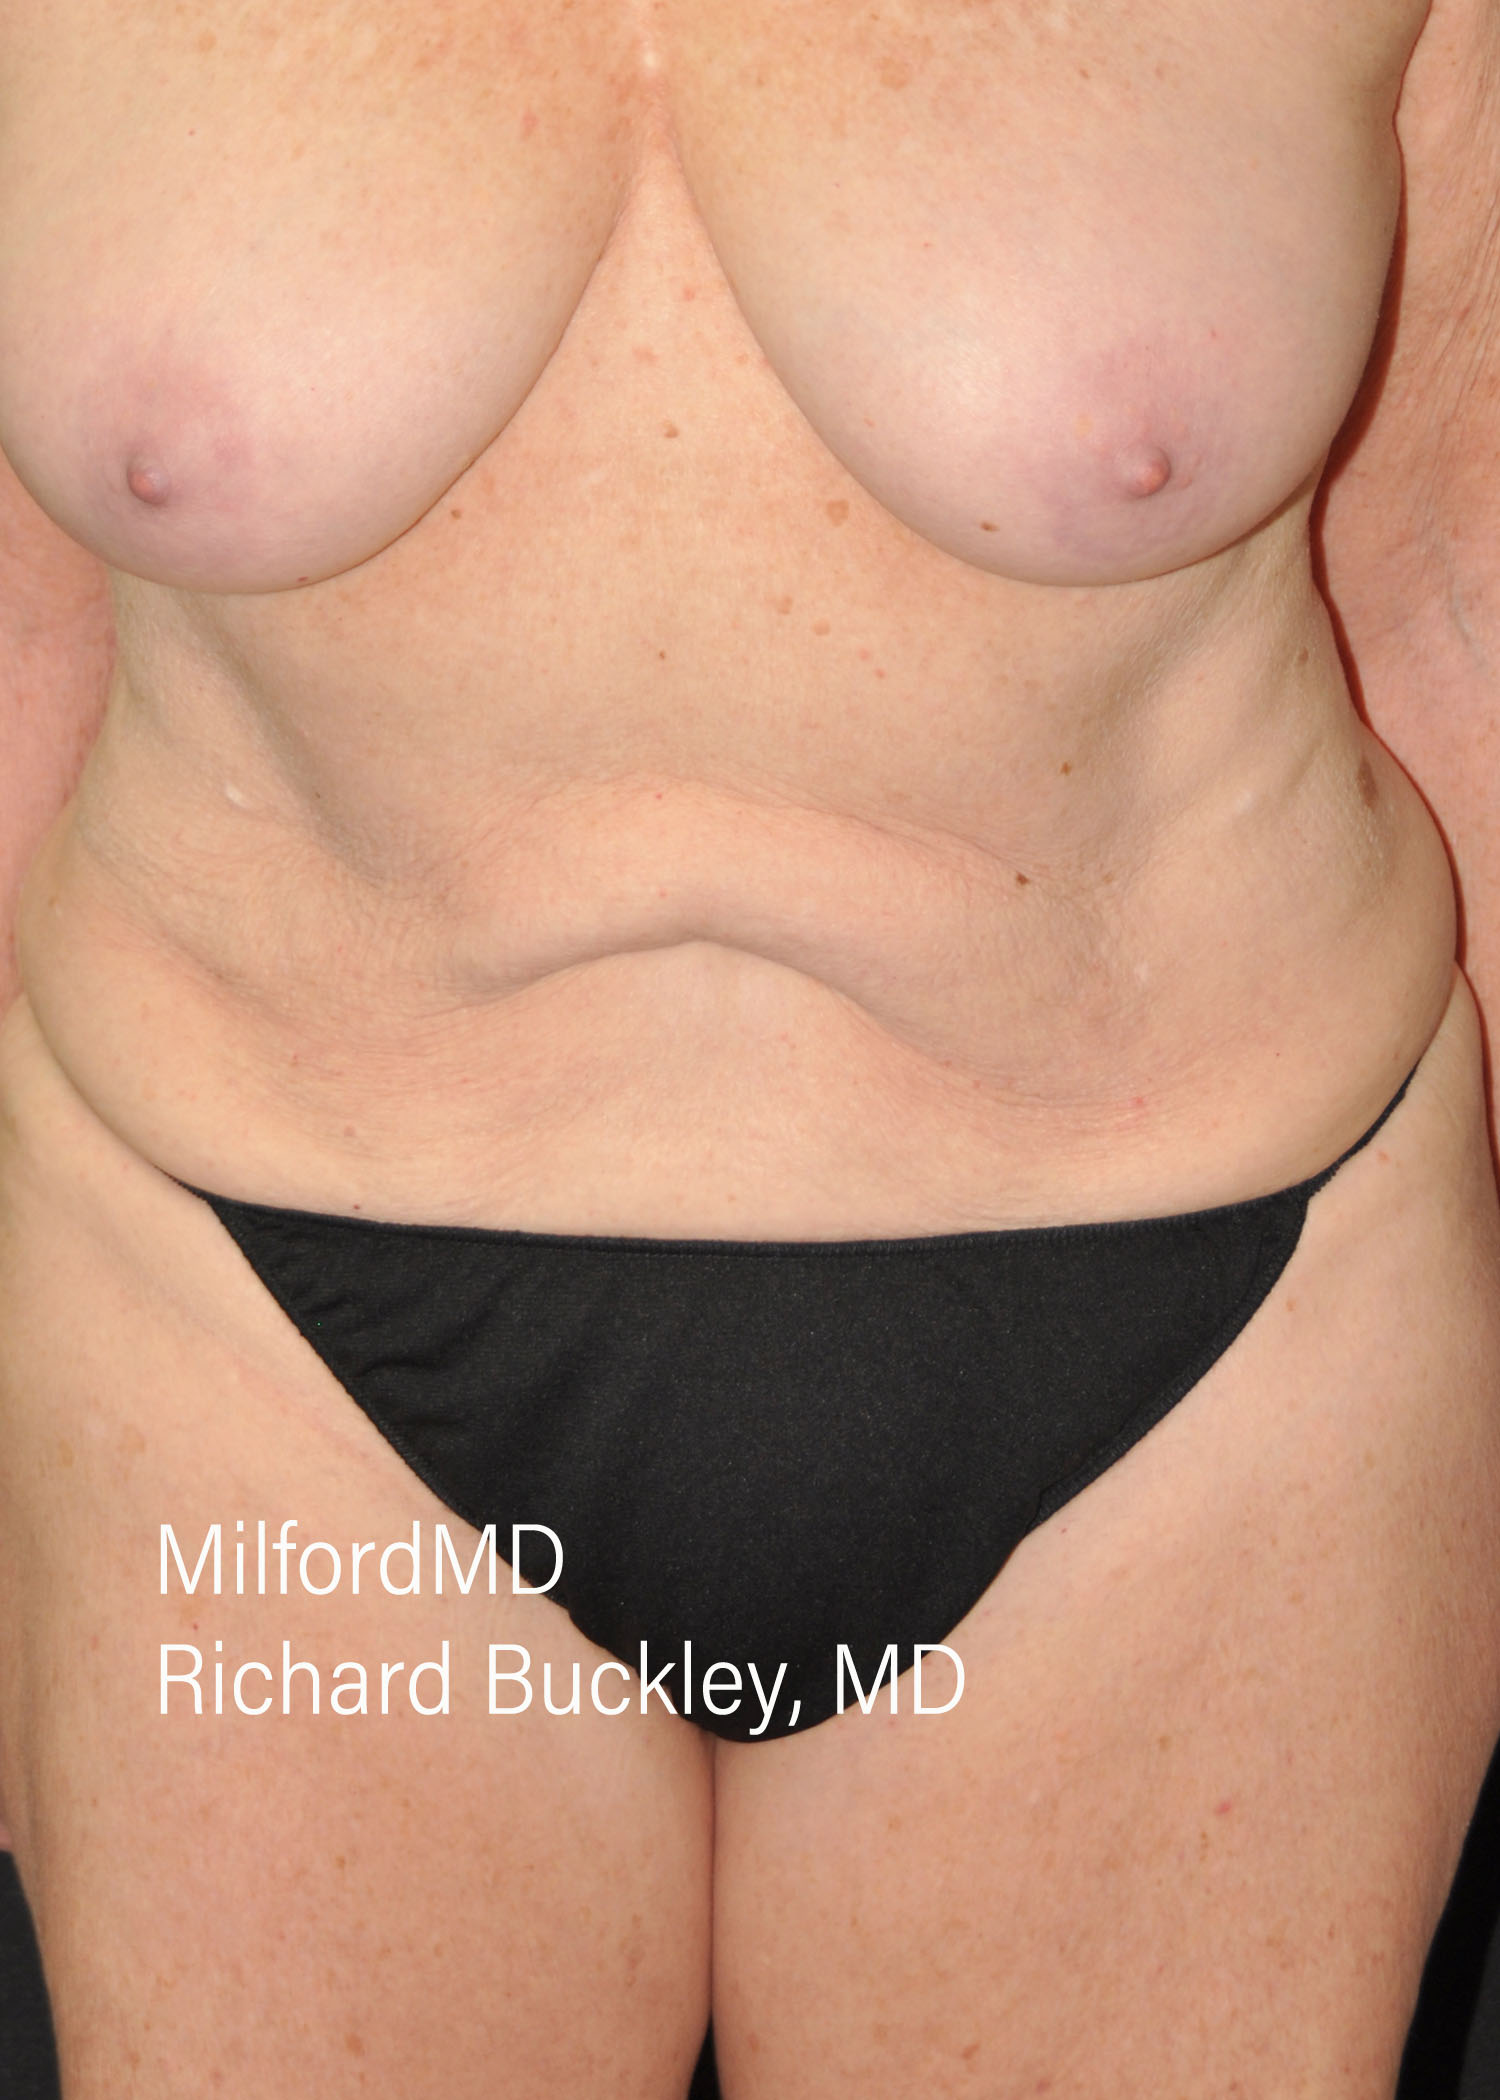 Reverse Abdominoplasty Before And After Photos